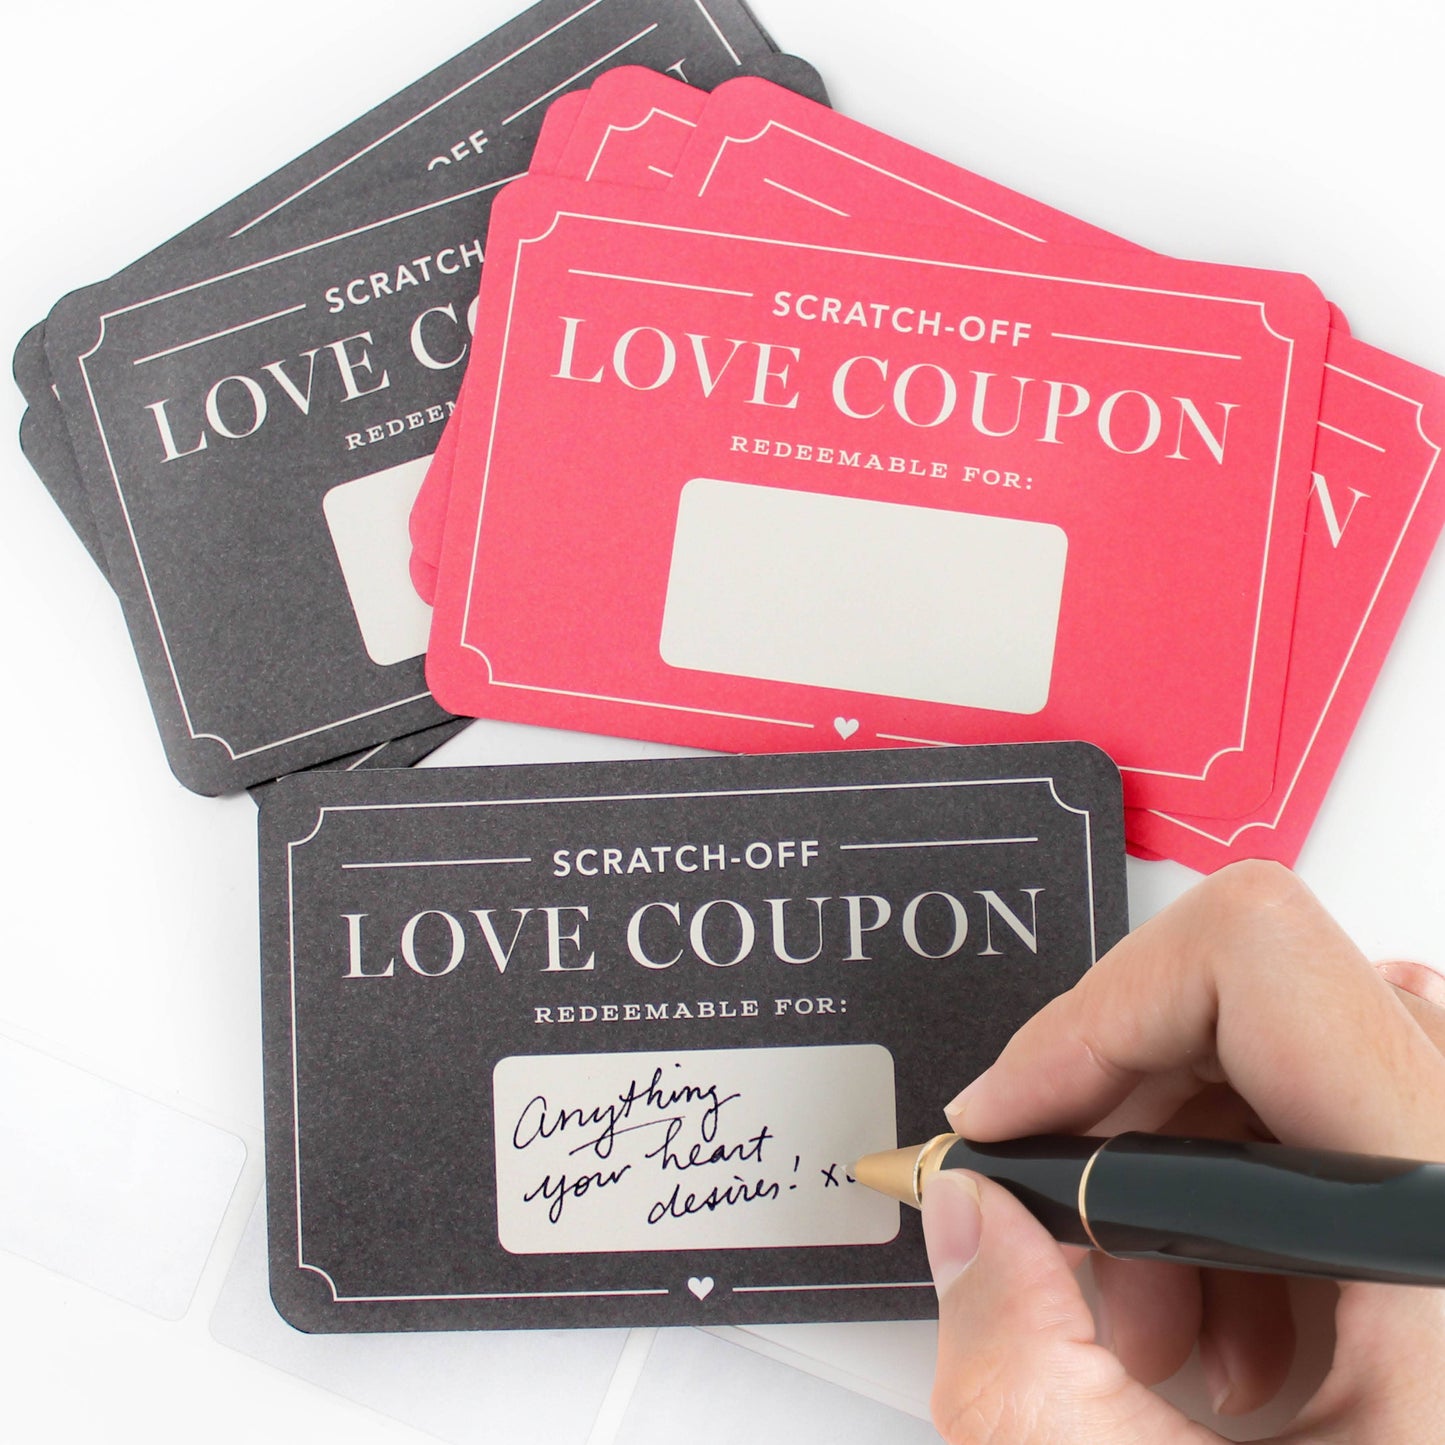 Scratch-off Love Coupons